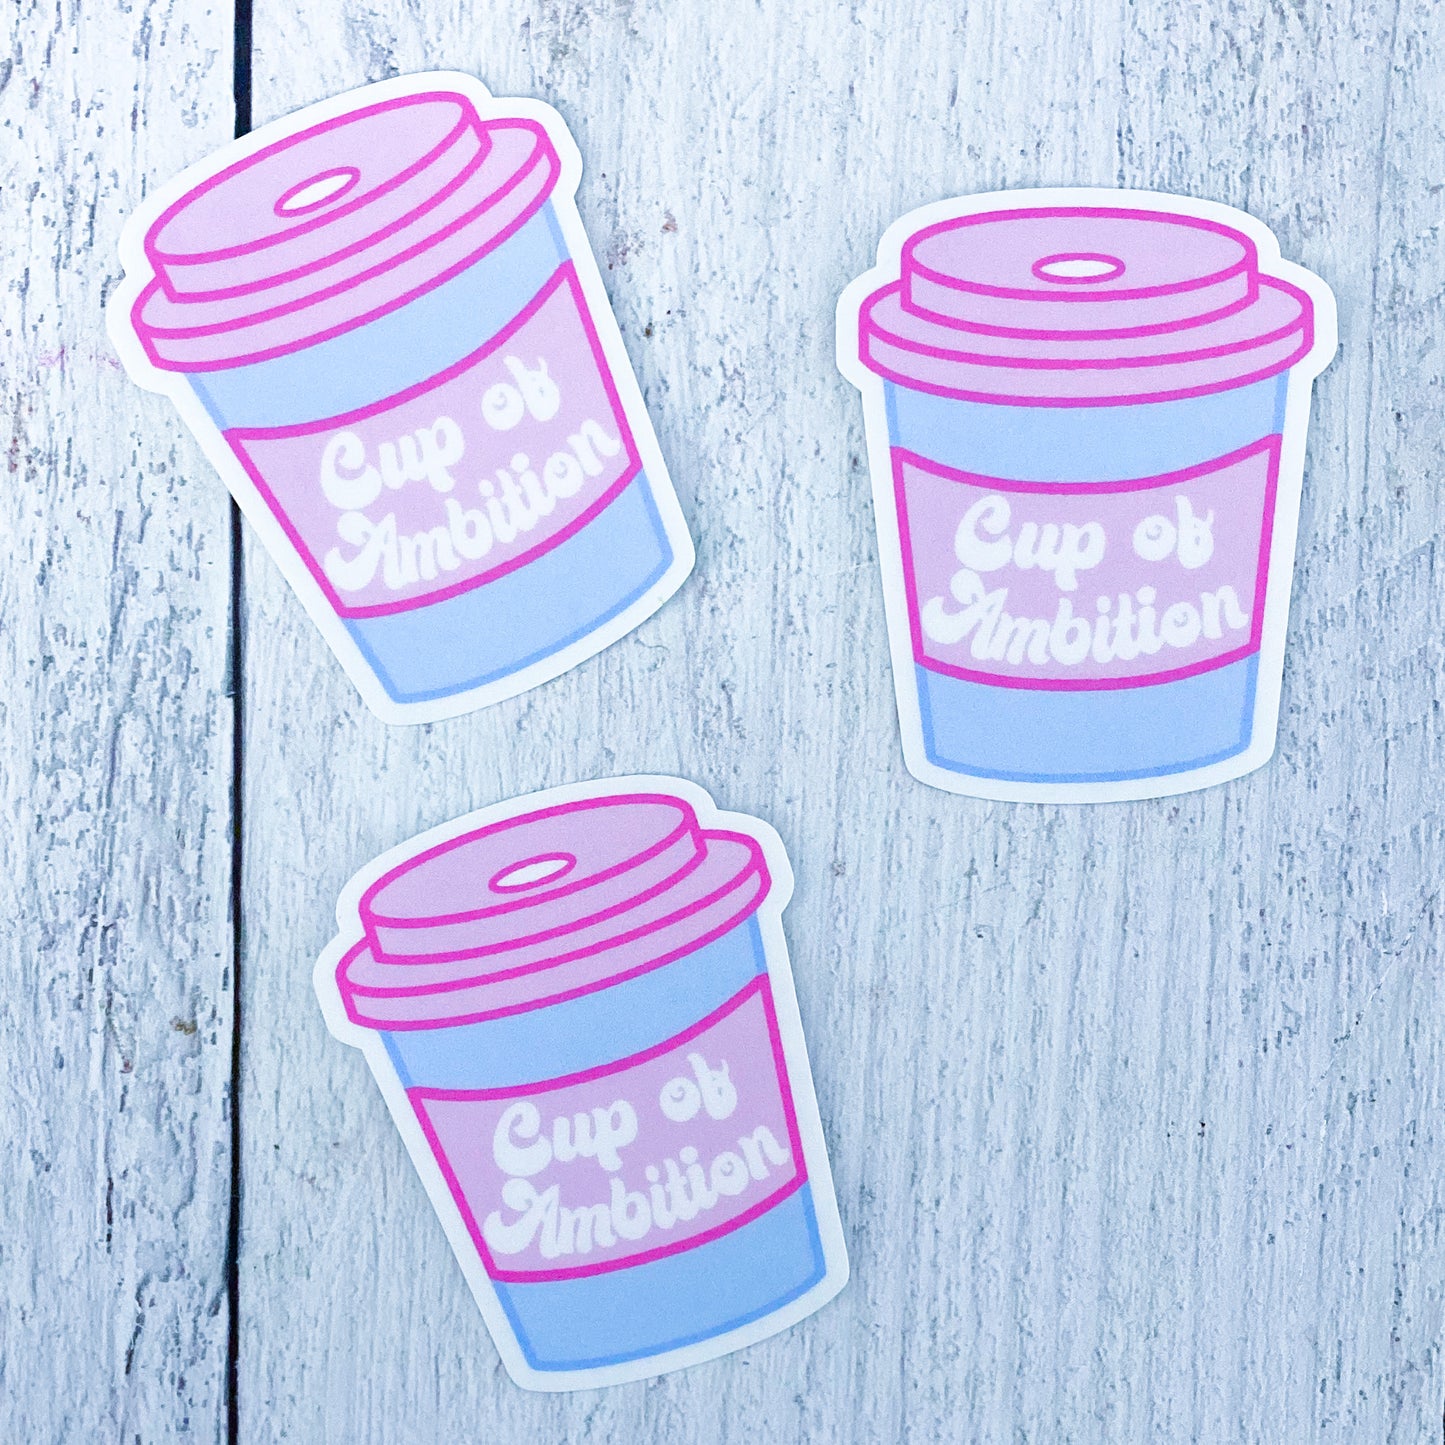 Cup Of Ambition Sticker